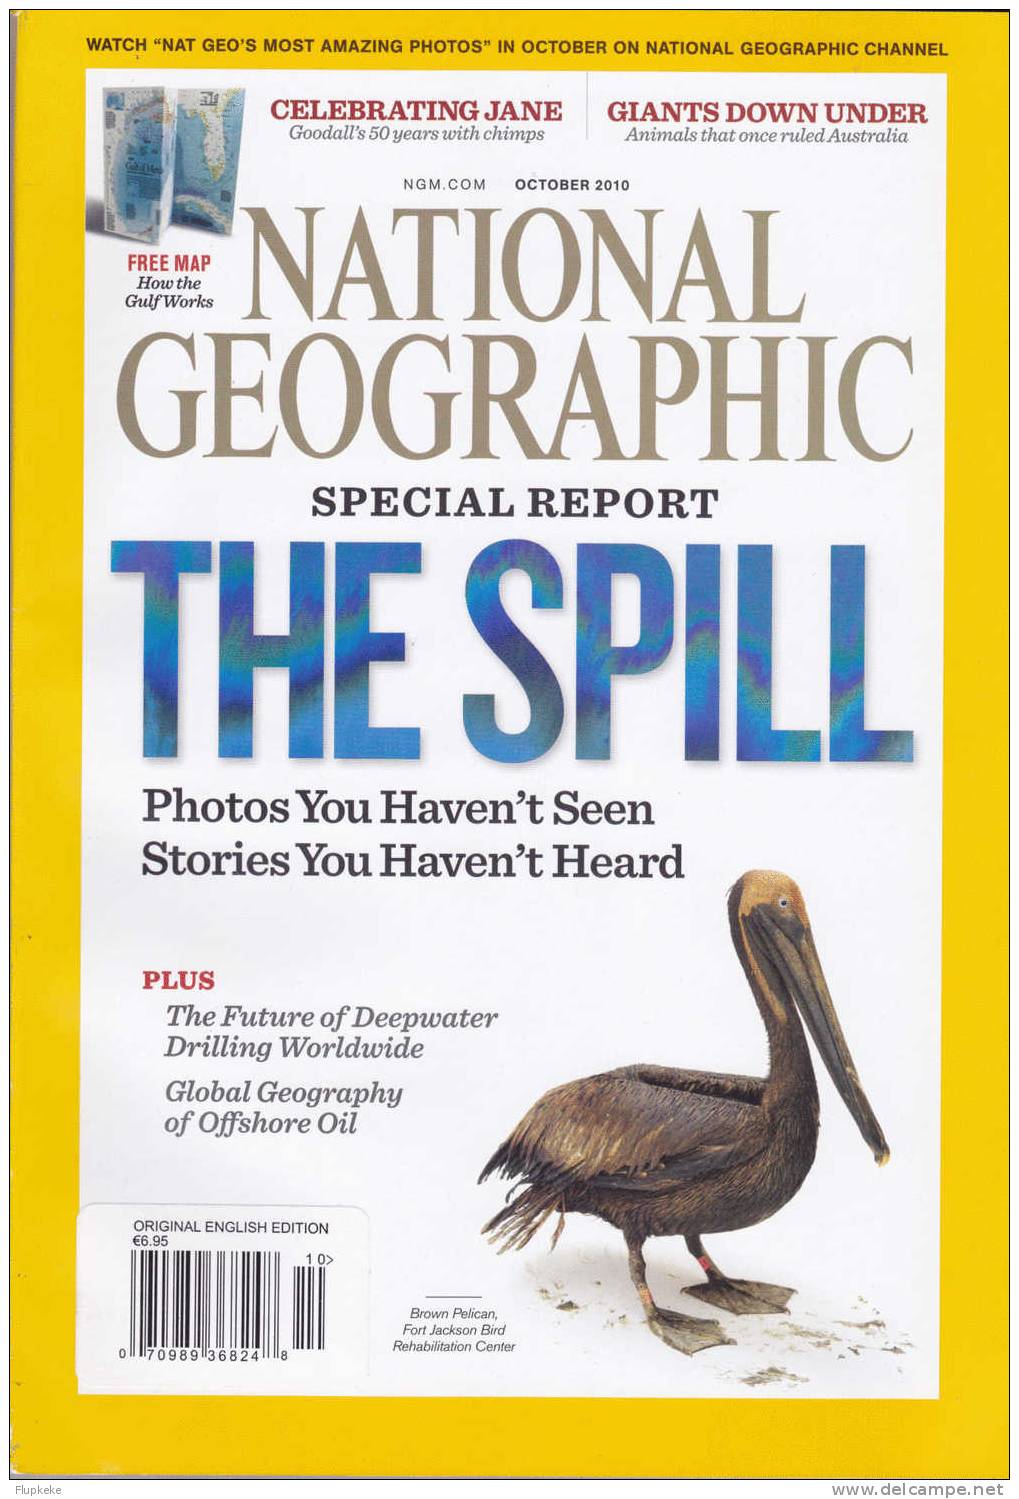 National Geographic U.S. October 2010 Special Report The Spill - Voyage/ Exploration